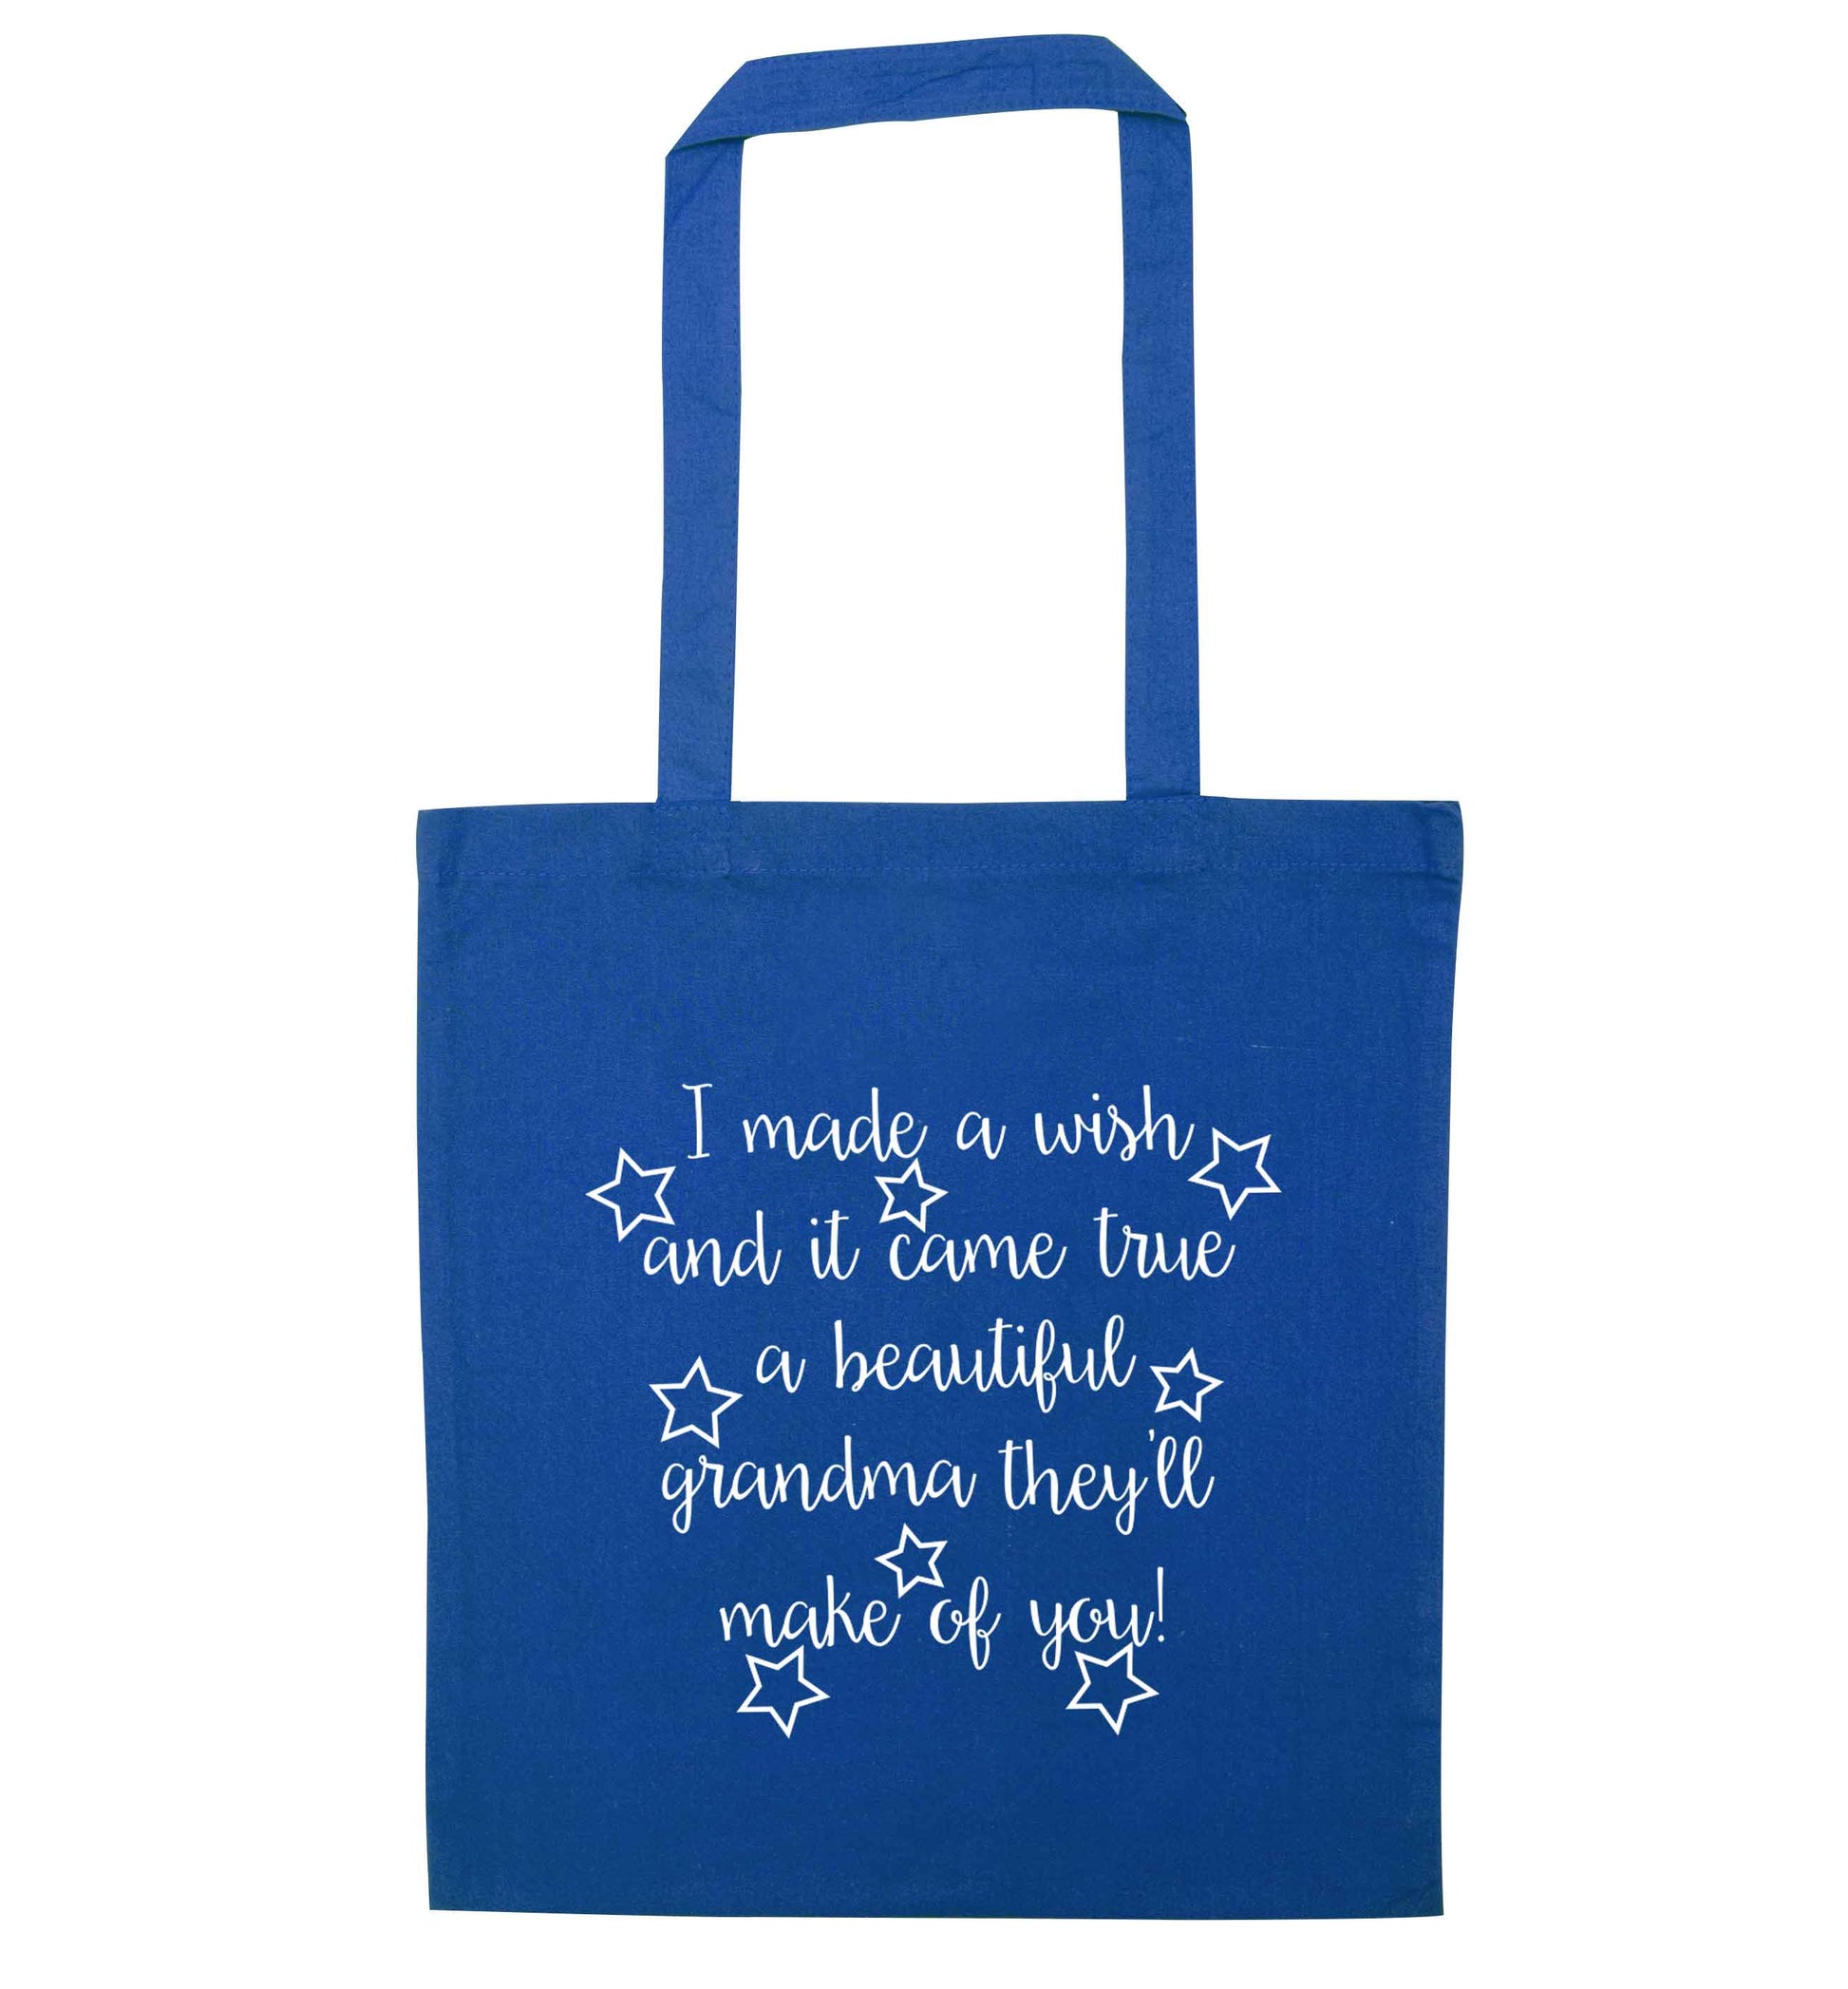 I made a wish and it came true a beautiful grandma they'll make of you! blue tote bag